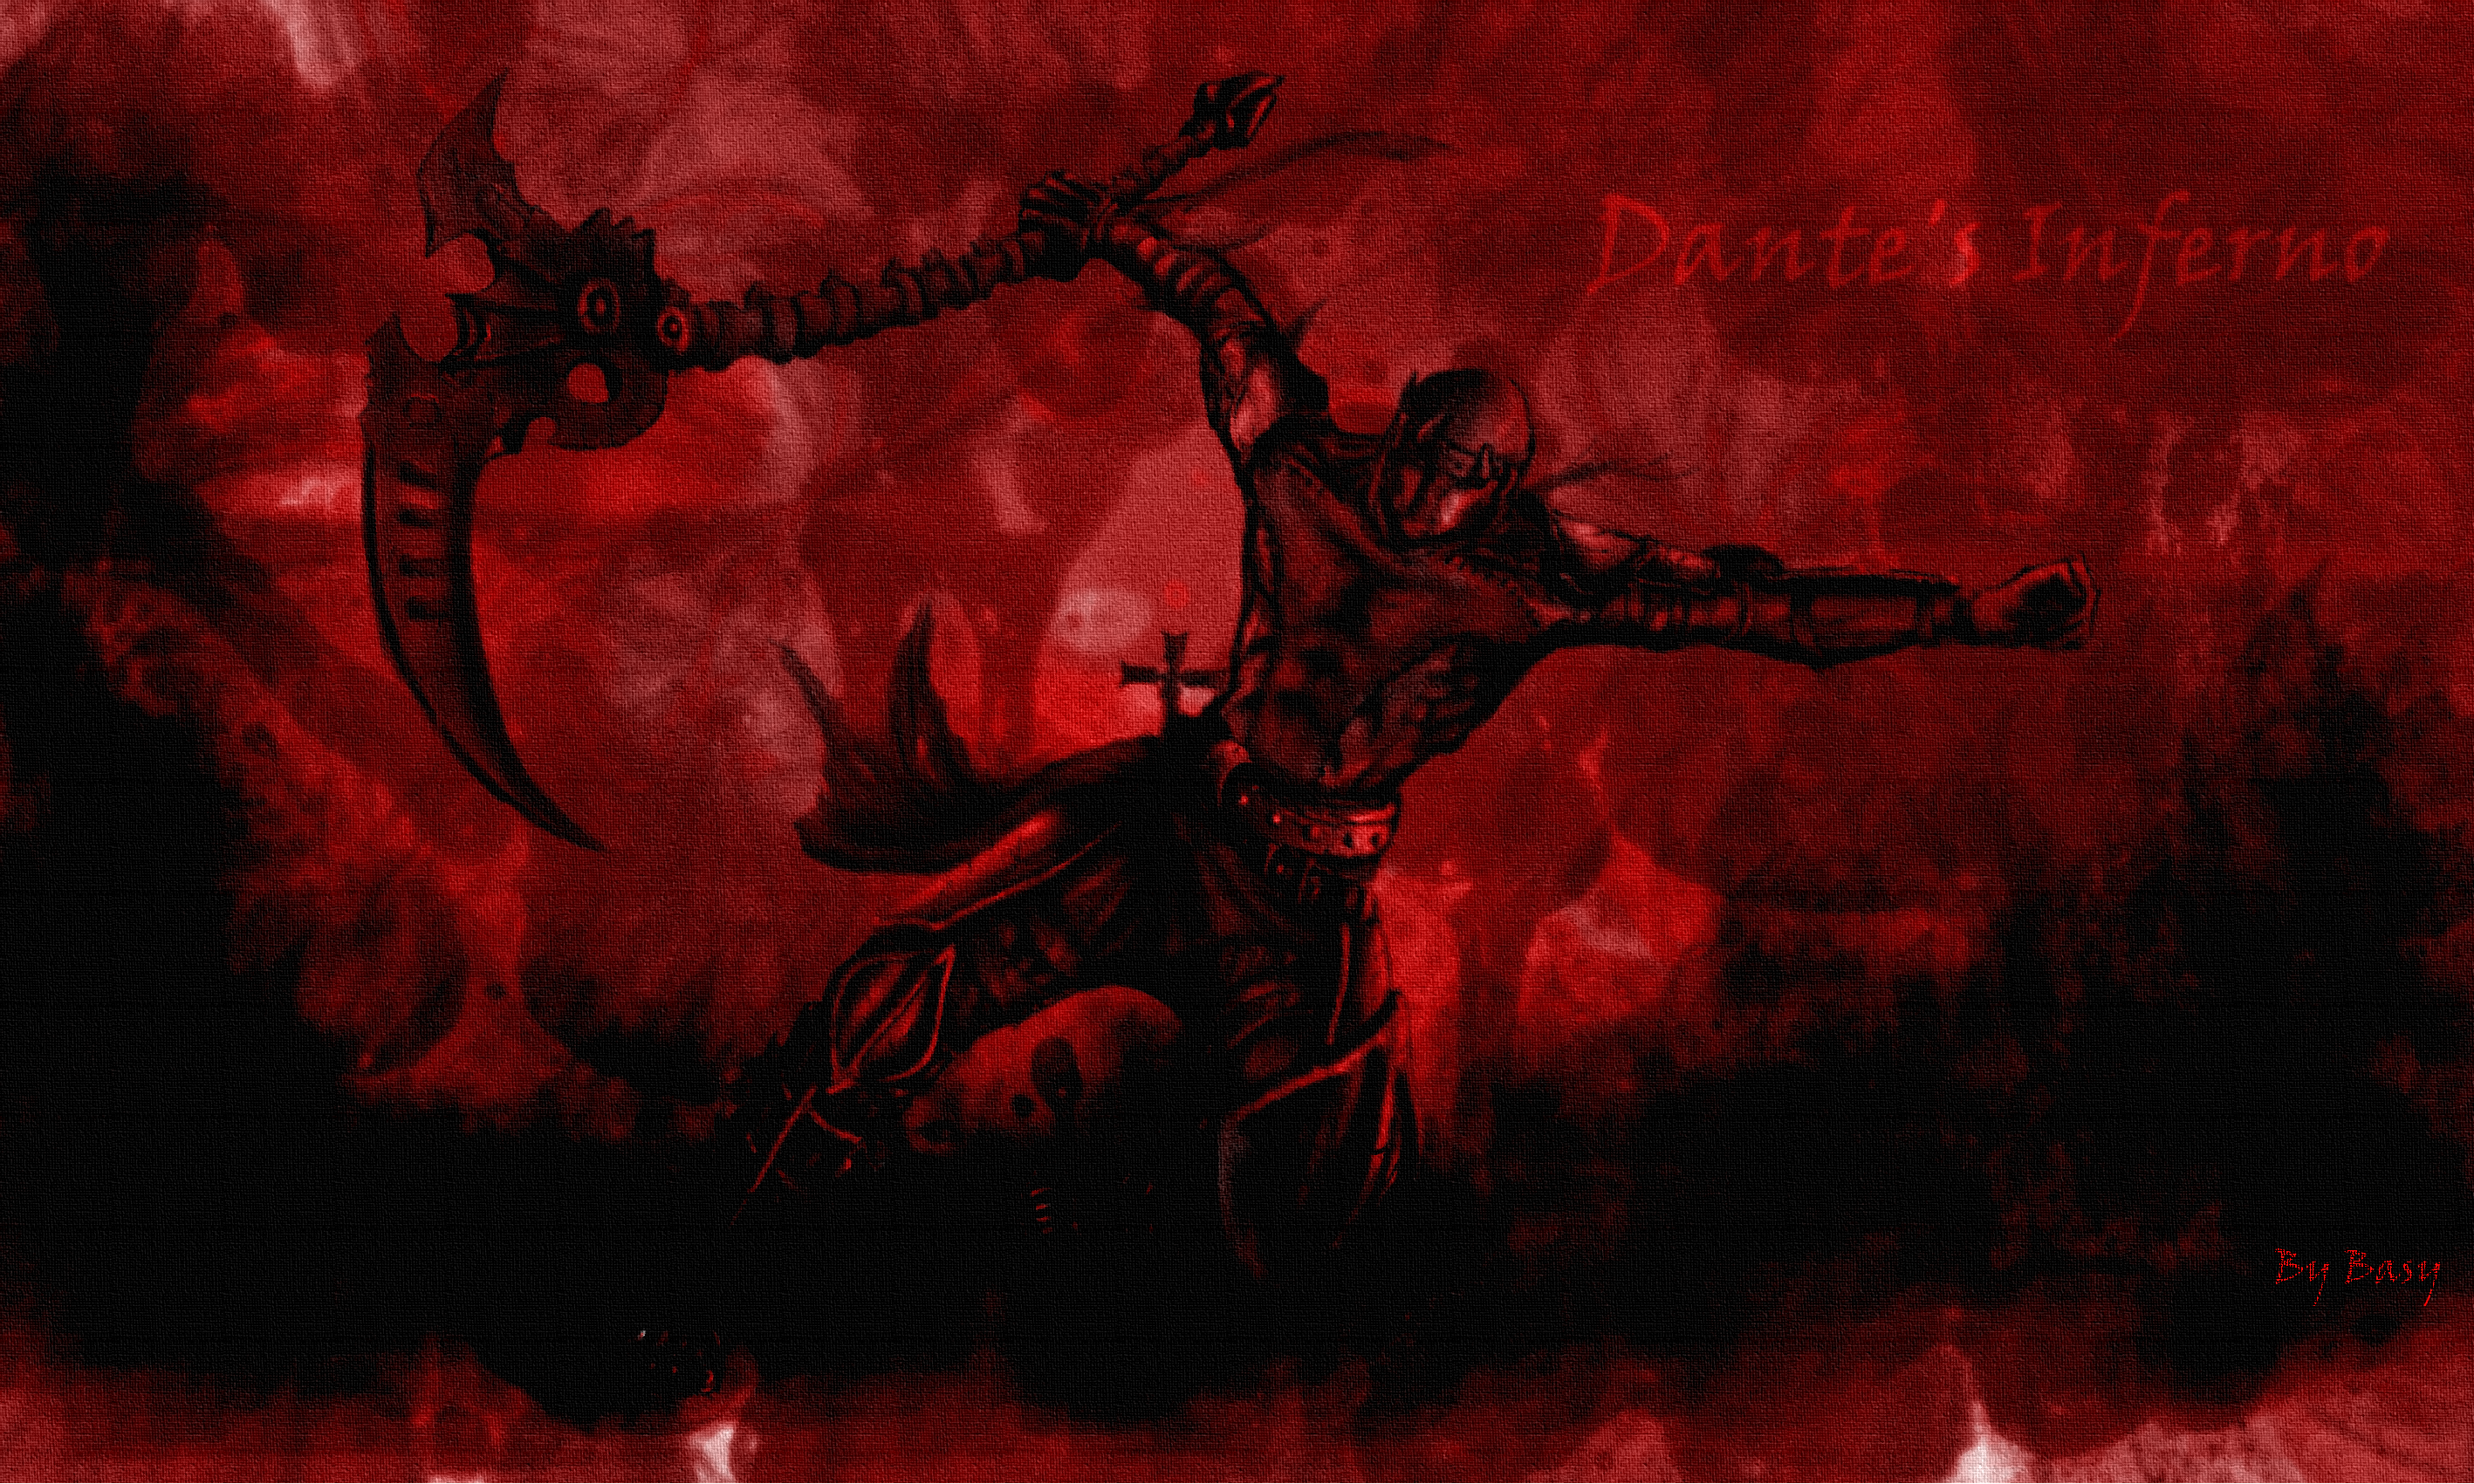 In compilation for wallpaper for dante's inferno, we have 24 images. 